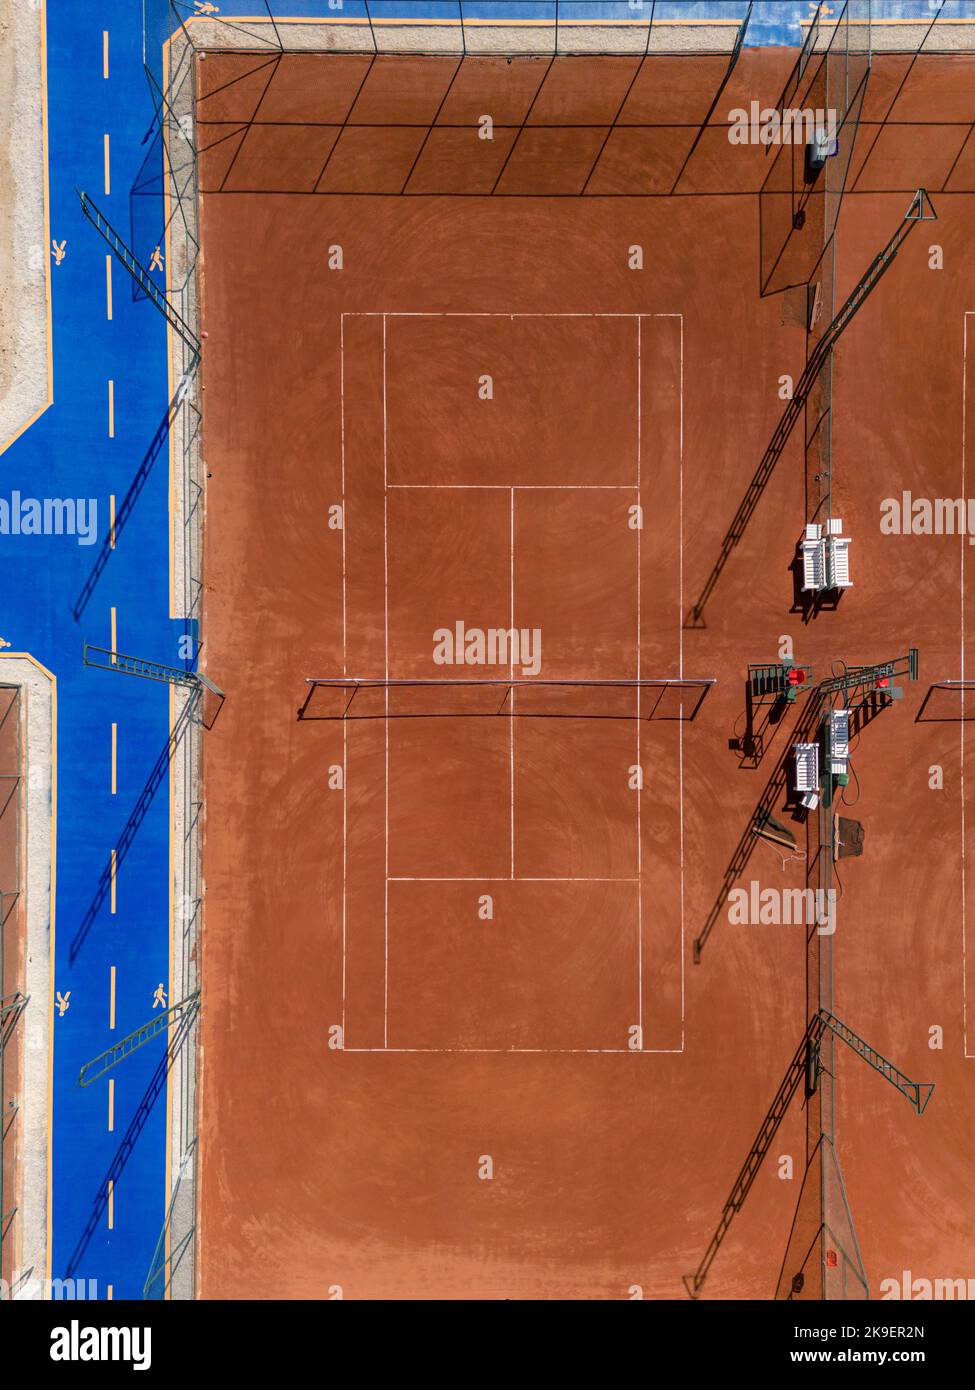 Aerial view of empty clay tennis court on a sunny day Stock Photo